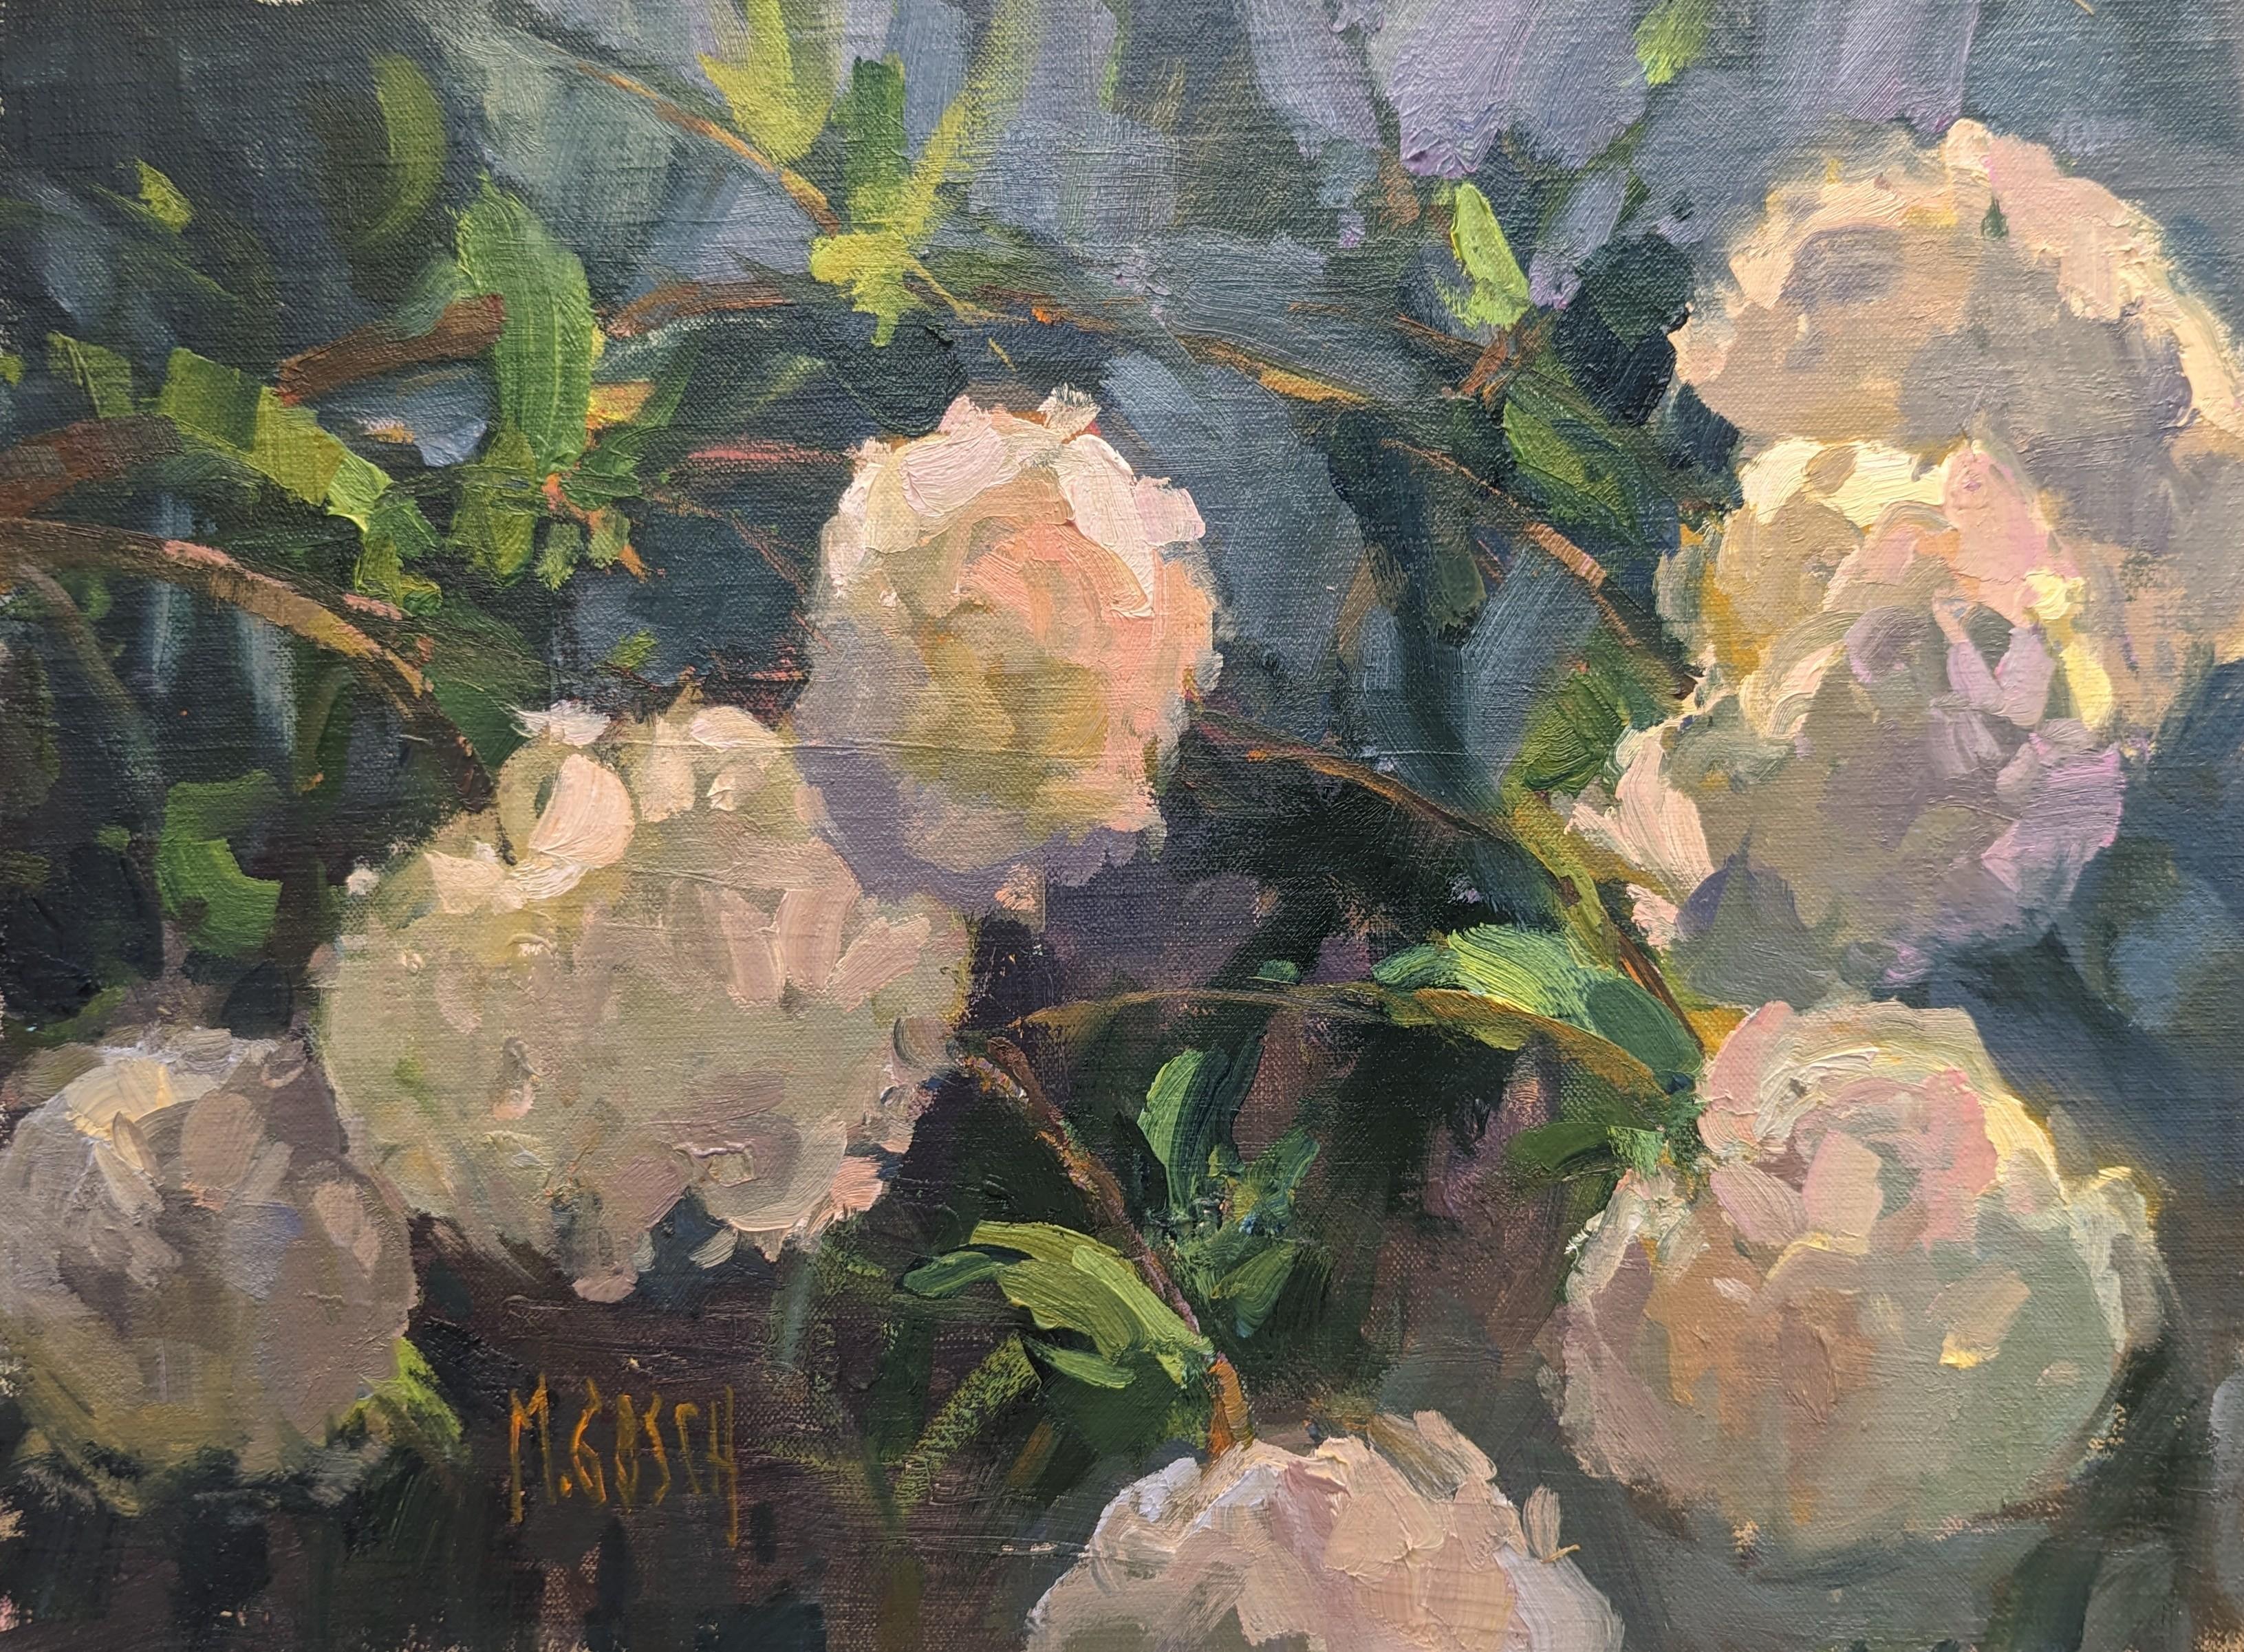 Unframed this piece is 12 x 16

Millie Gosch is an avid plein air painter who paints studies from real life and from these studies she creates her beautiful landscape pieces. An experienced artist, she has worked for over 25 years as a professional